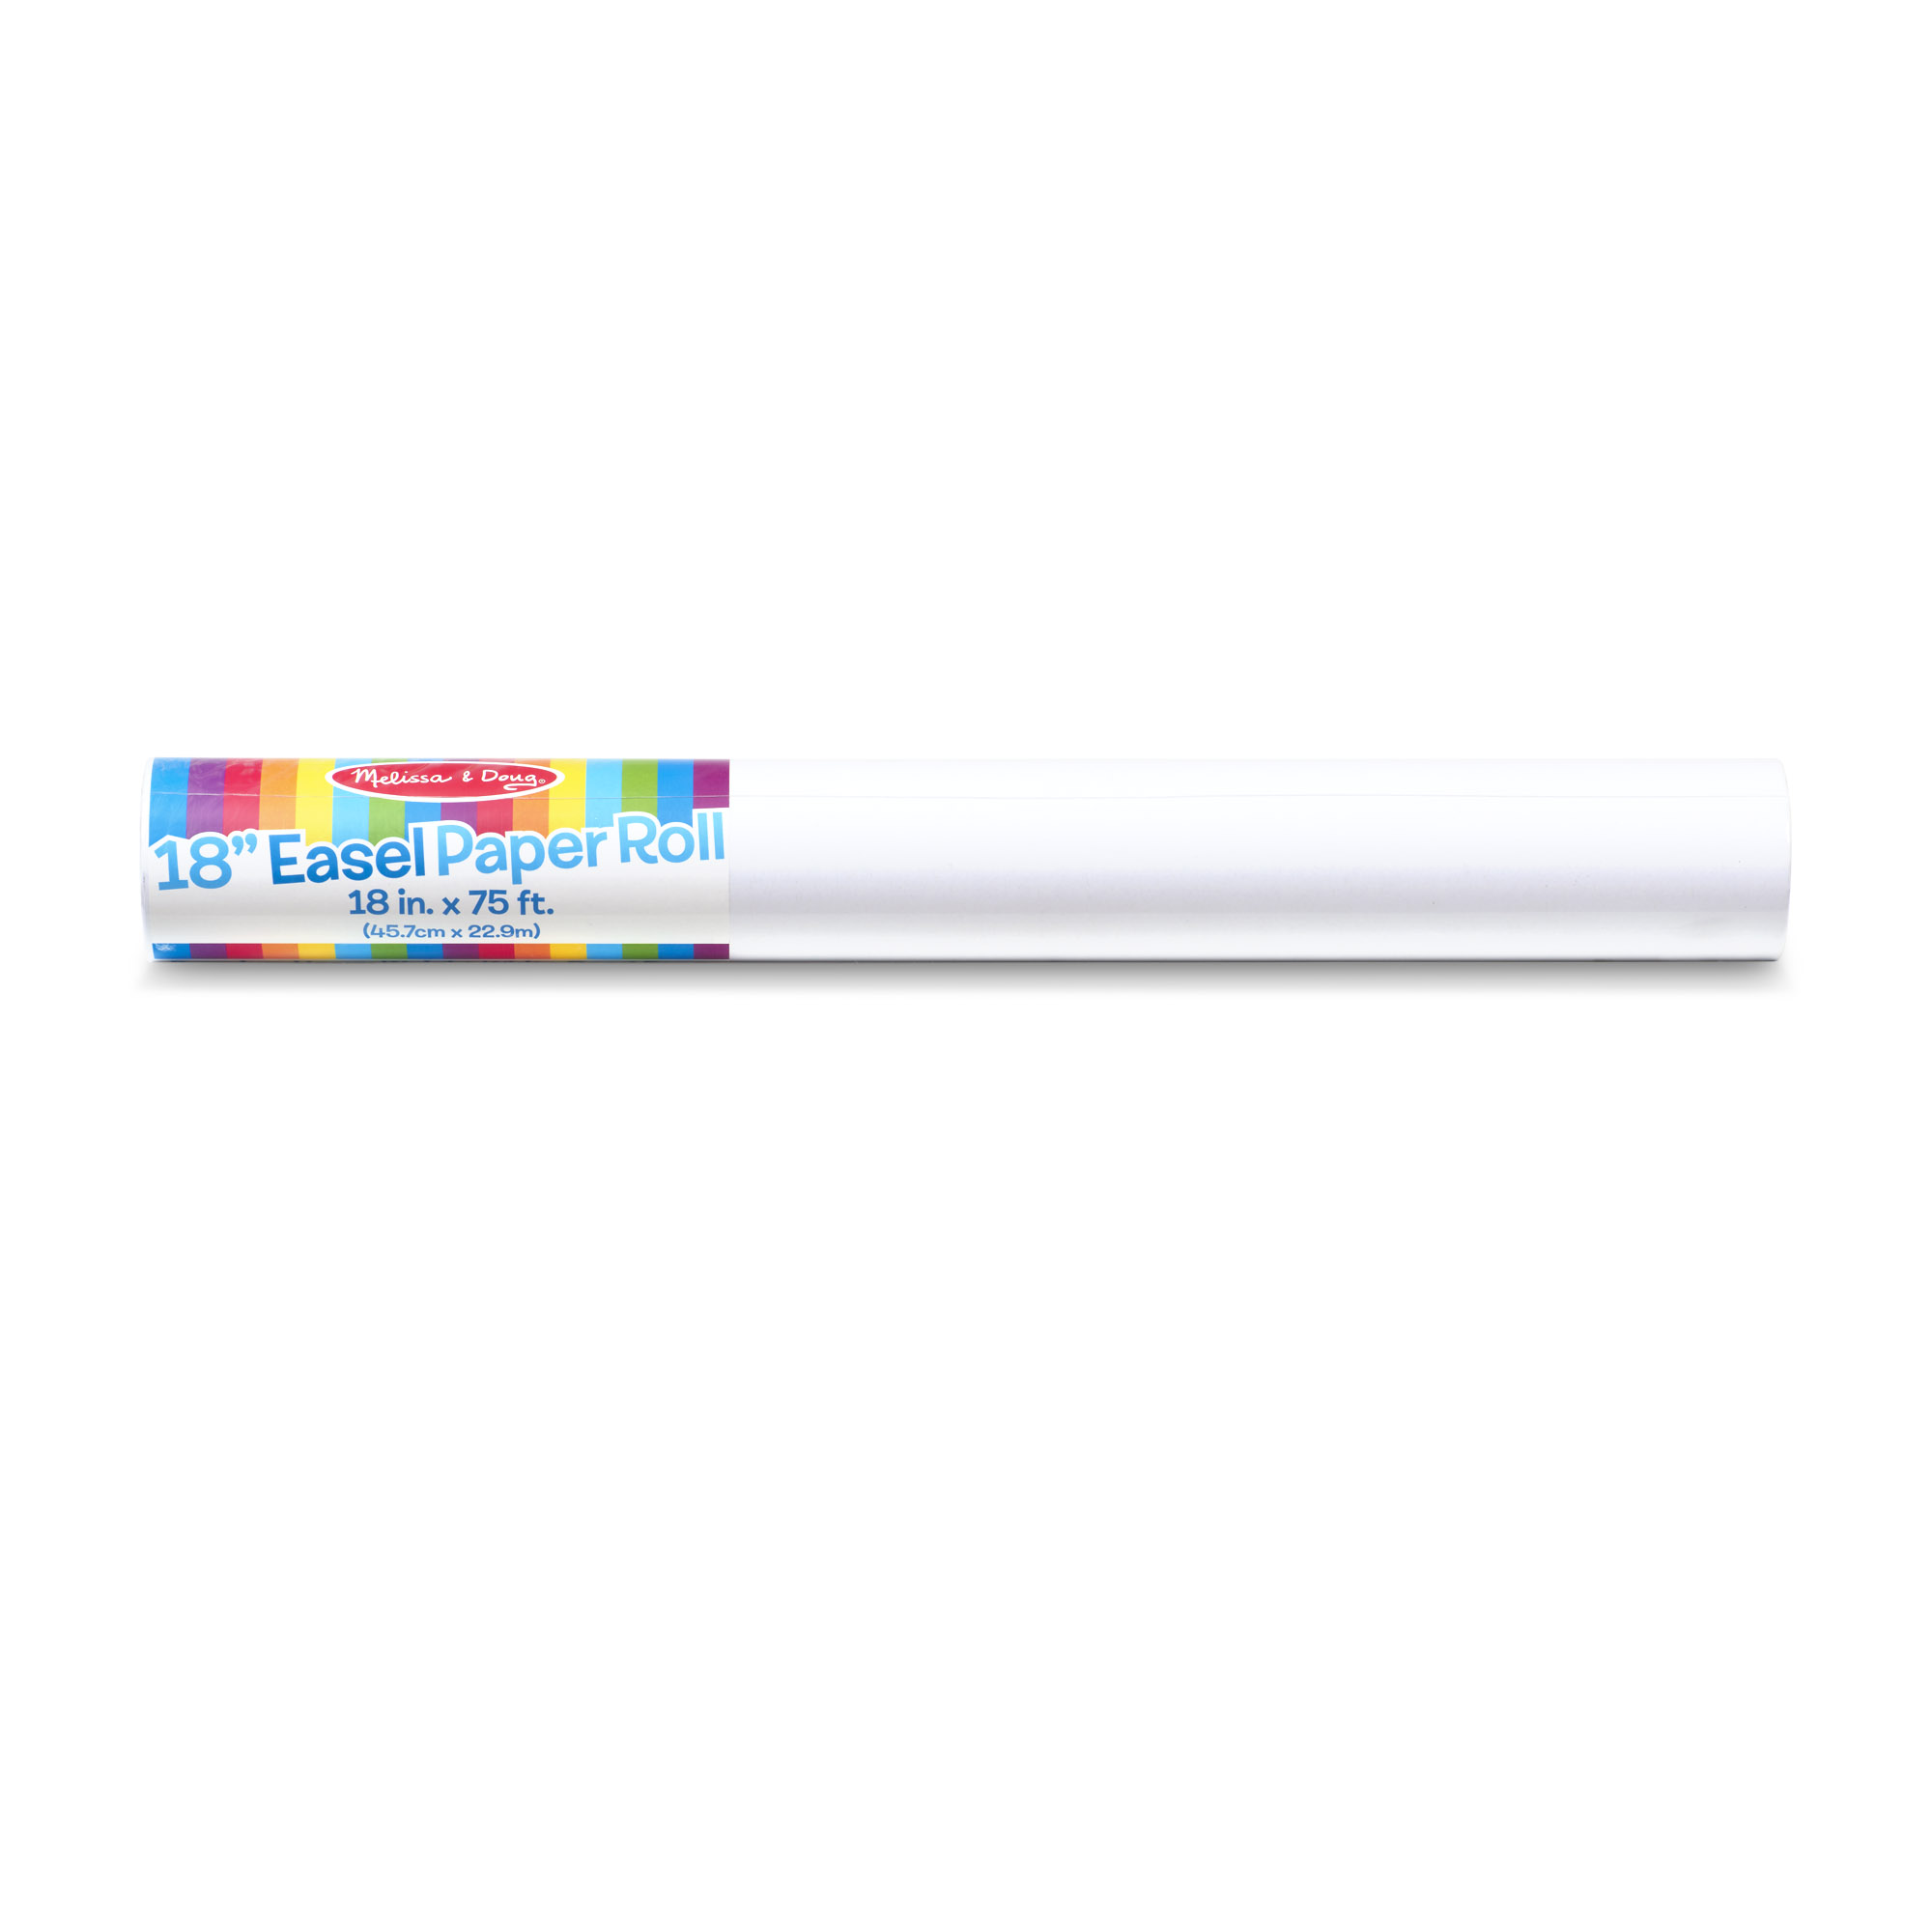 Easel Paper Roll (18'x75′)  Compendium Educational Games